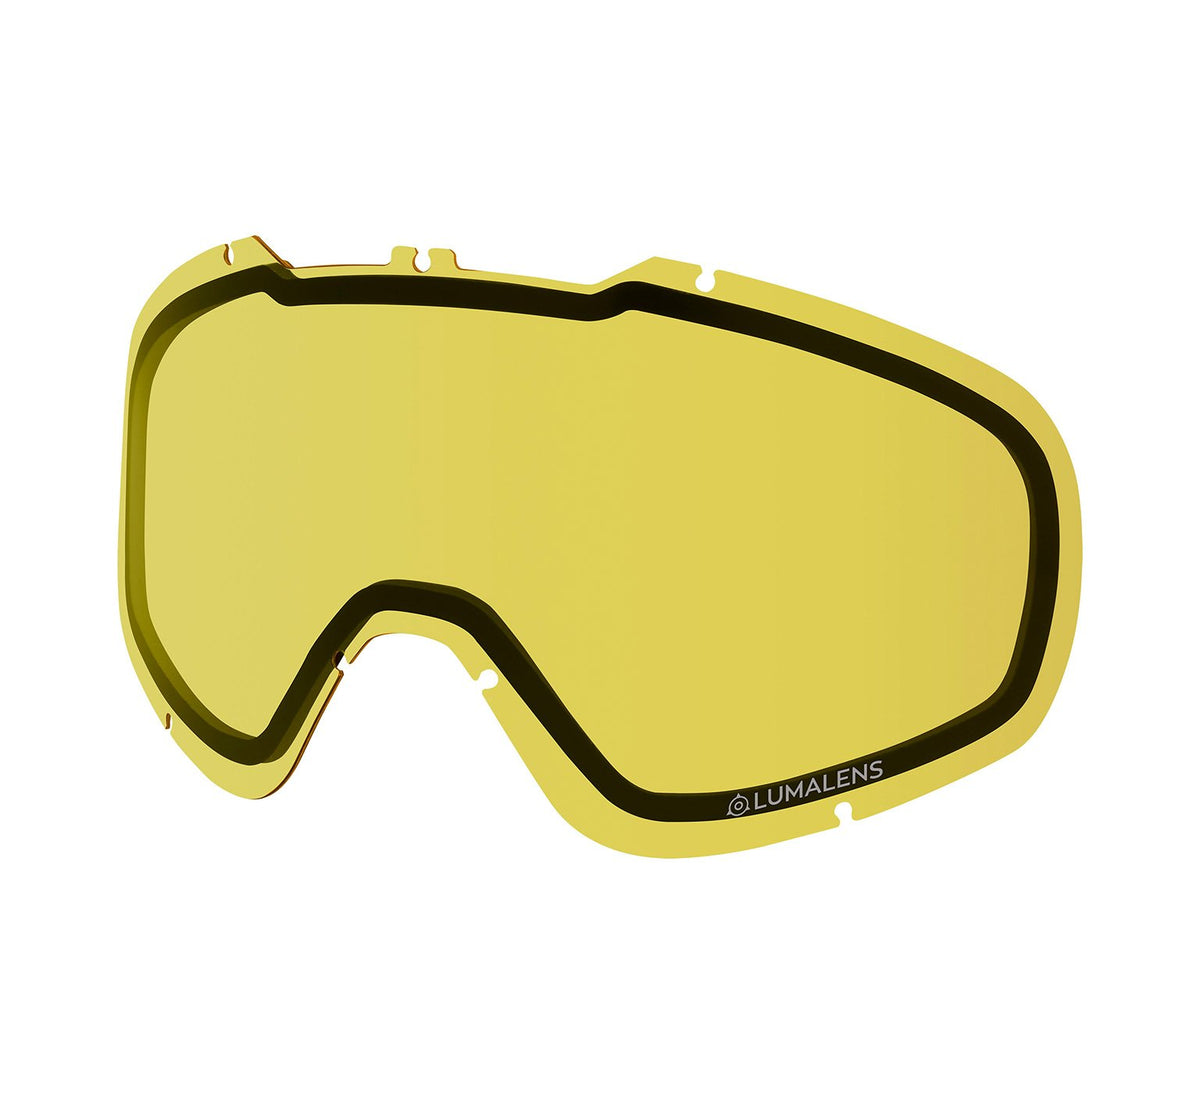 DX2 Replacement Lens - Lumalens Yellow